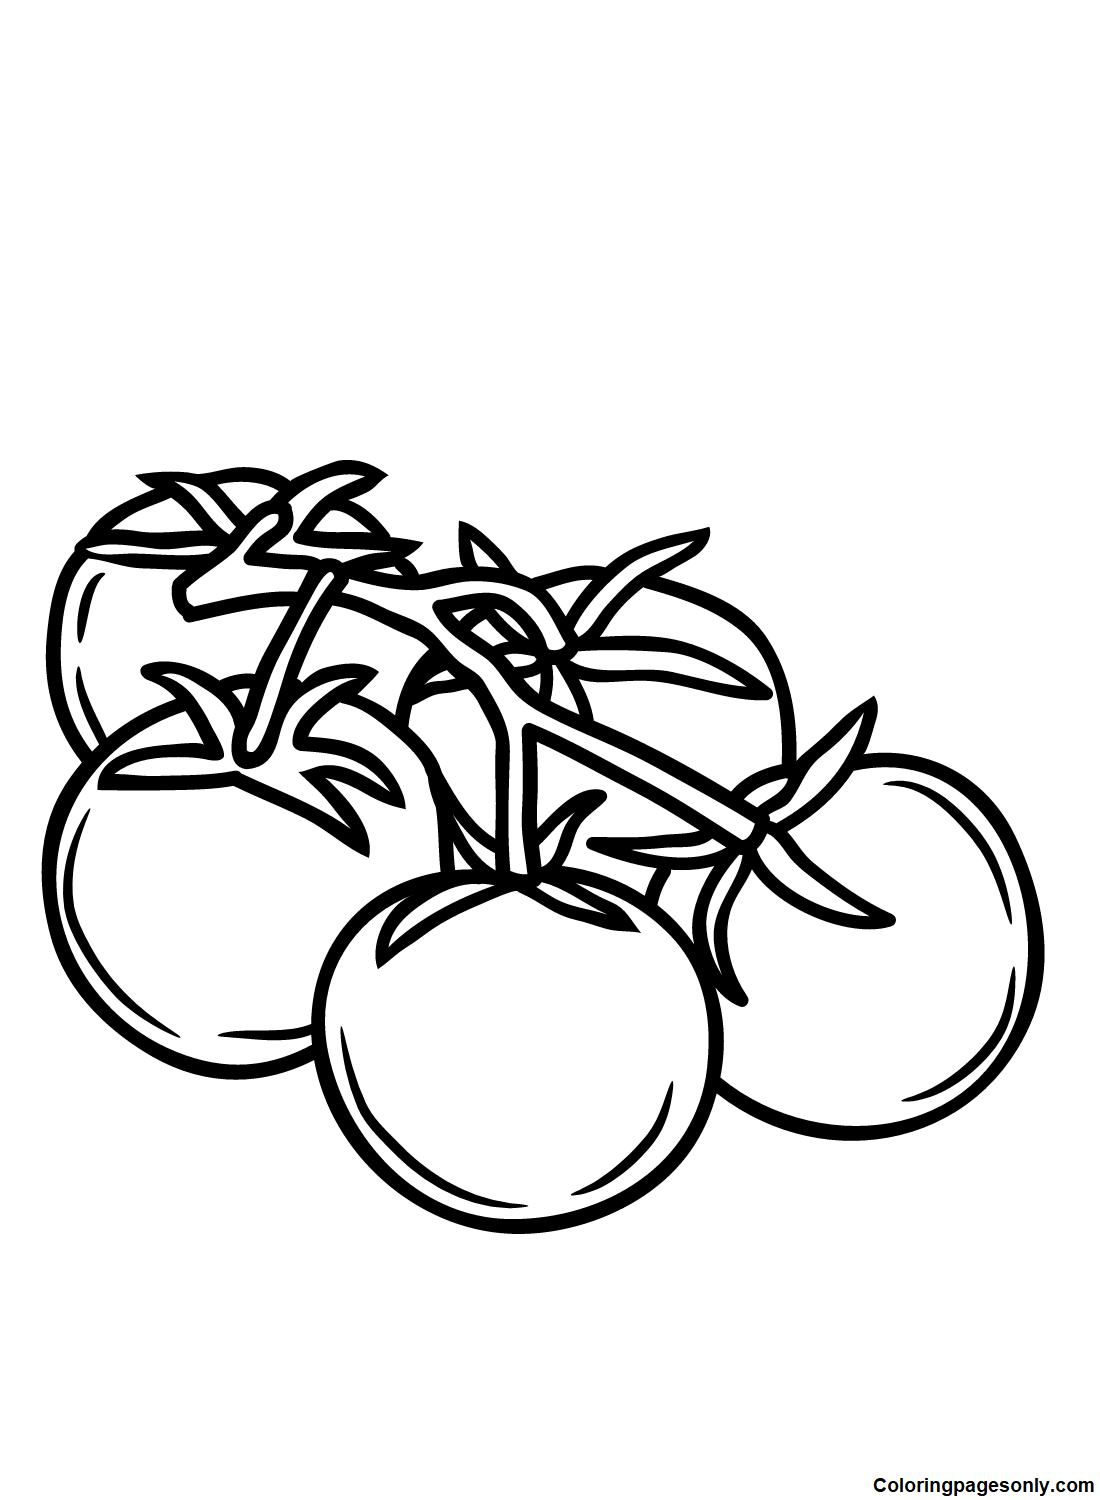 Tomatoes Coloring Pages